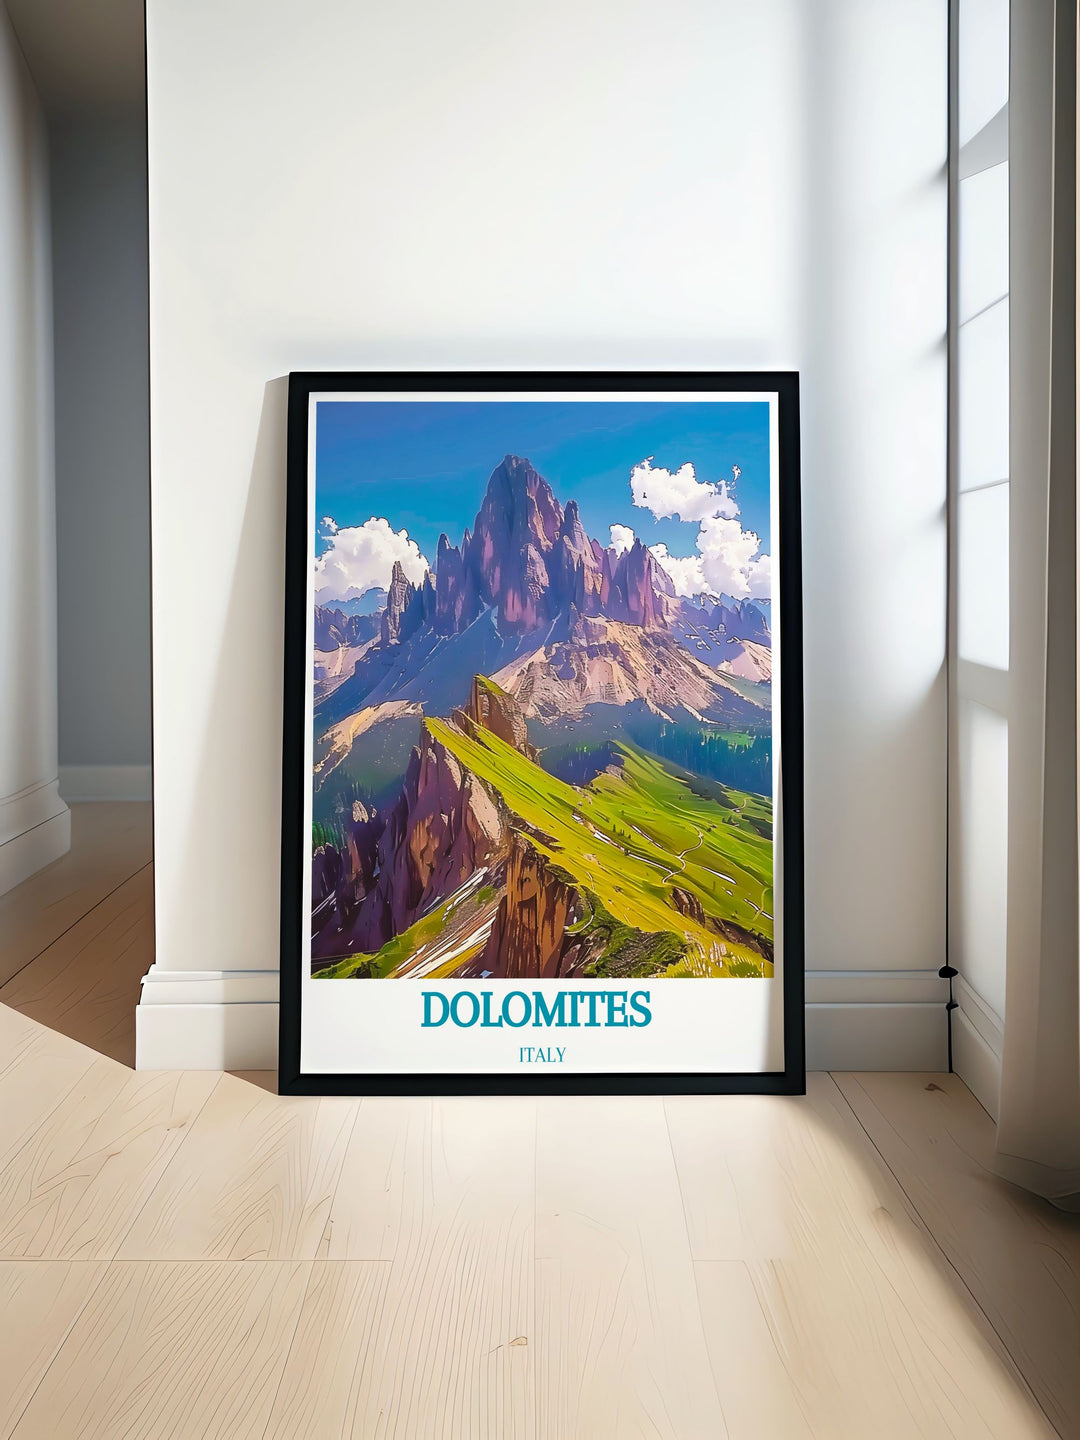 A detailed print of the Dolomites showcasing the dramatic alpine landscape and iconic views of Seceda, perfect for nature lovers and adventure enthusiasts.